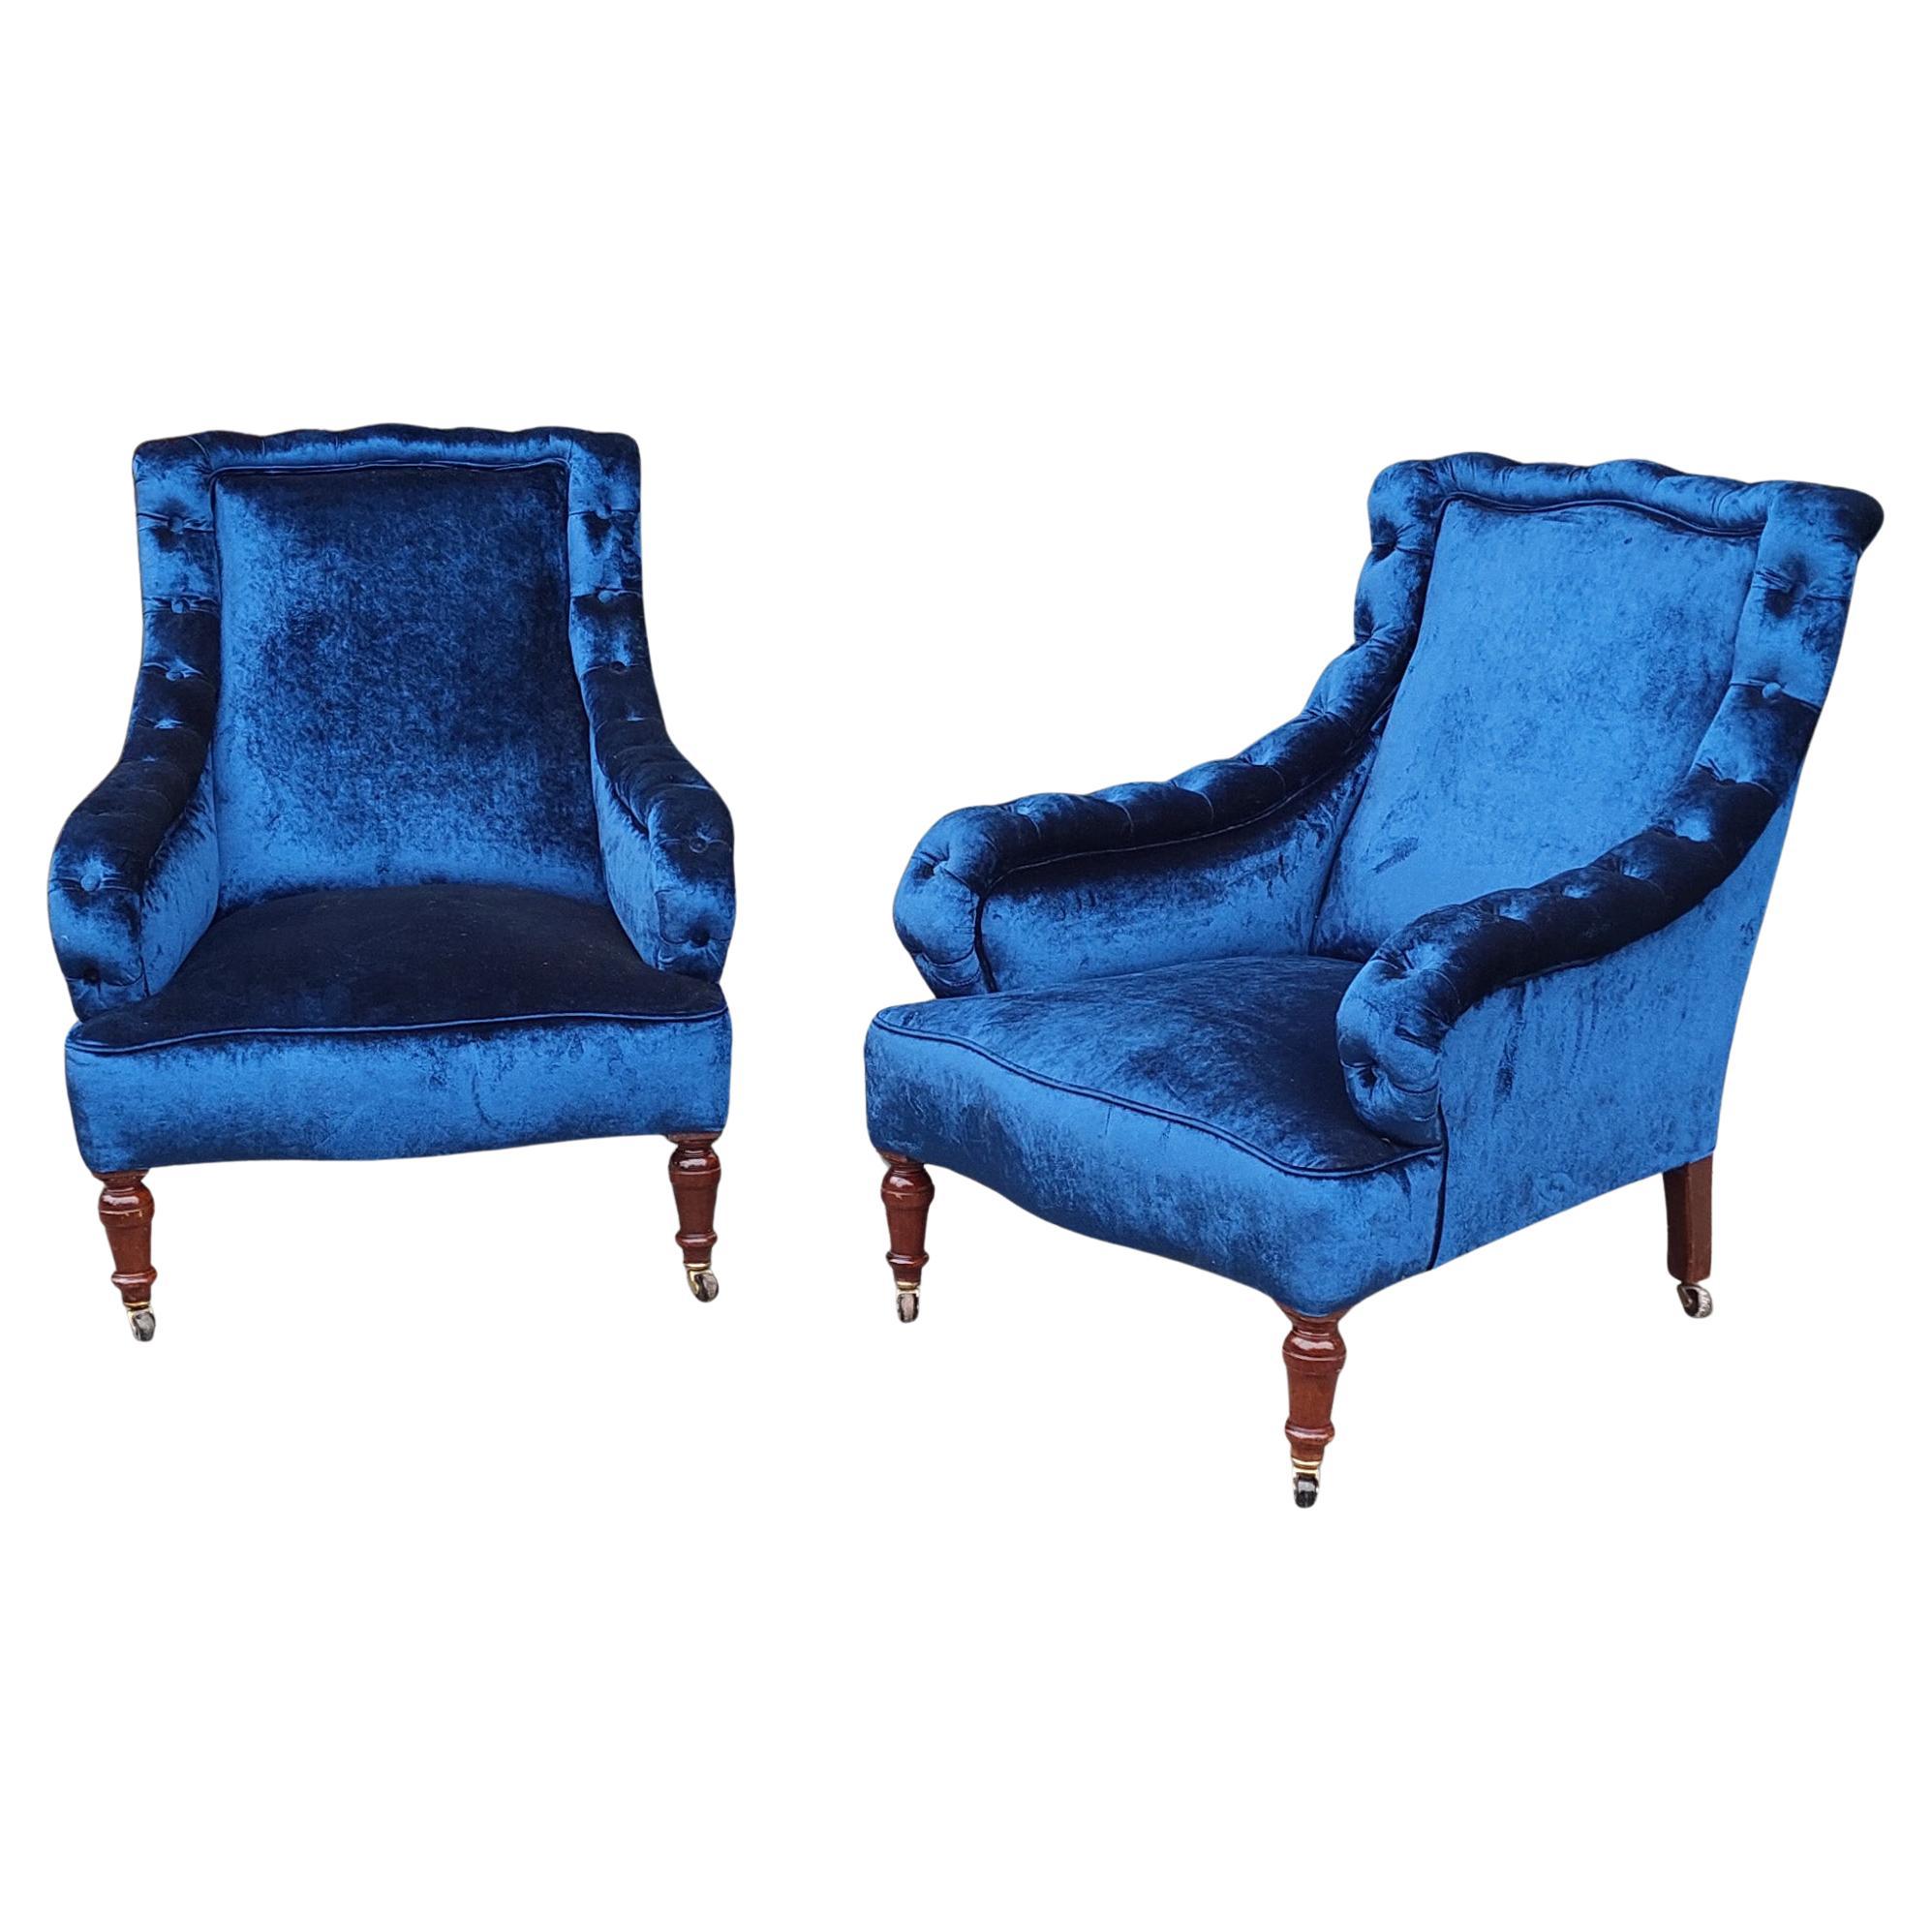 Pair of Victorian Upholstered Armchairs For Sale